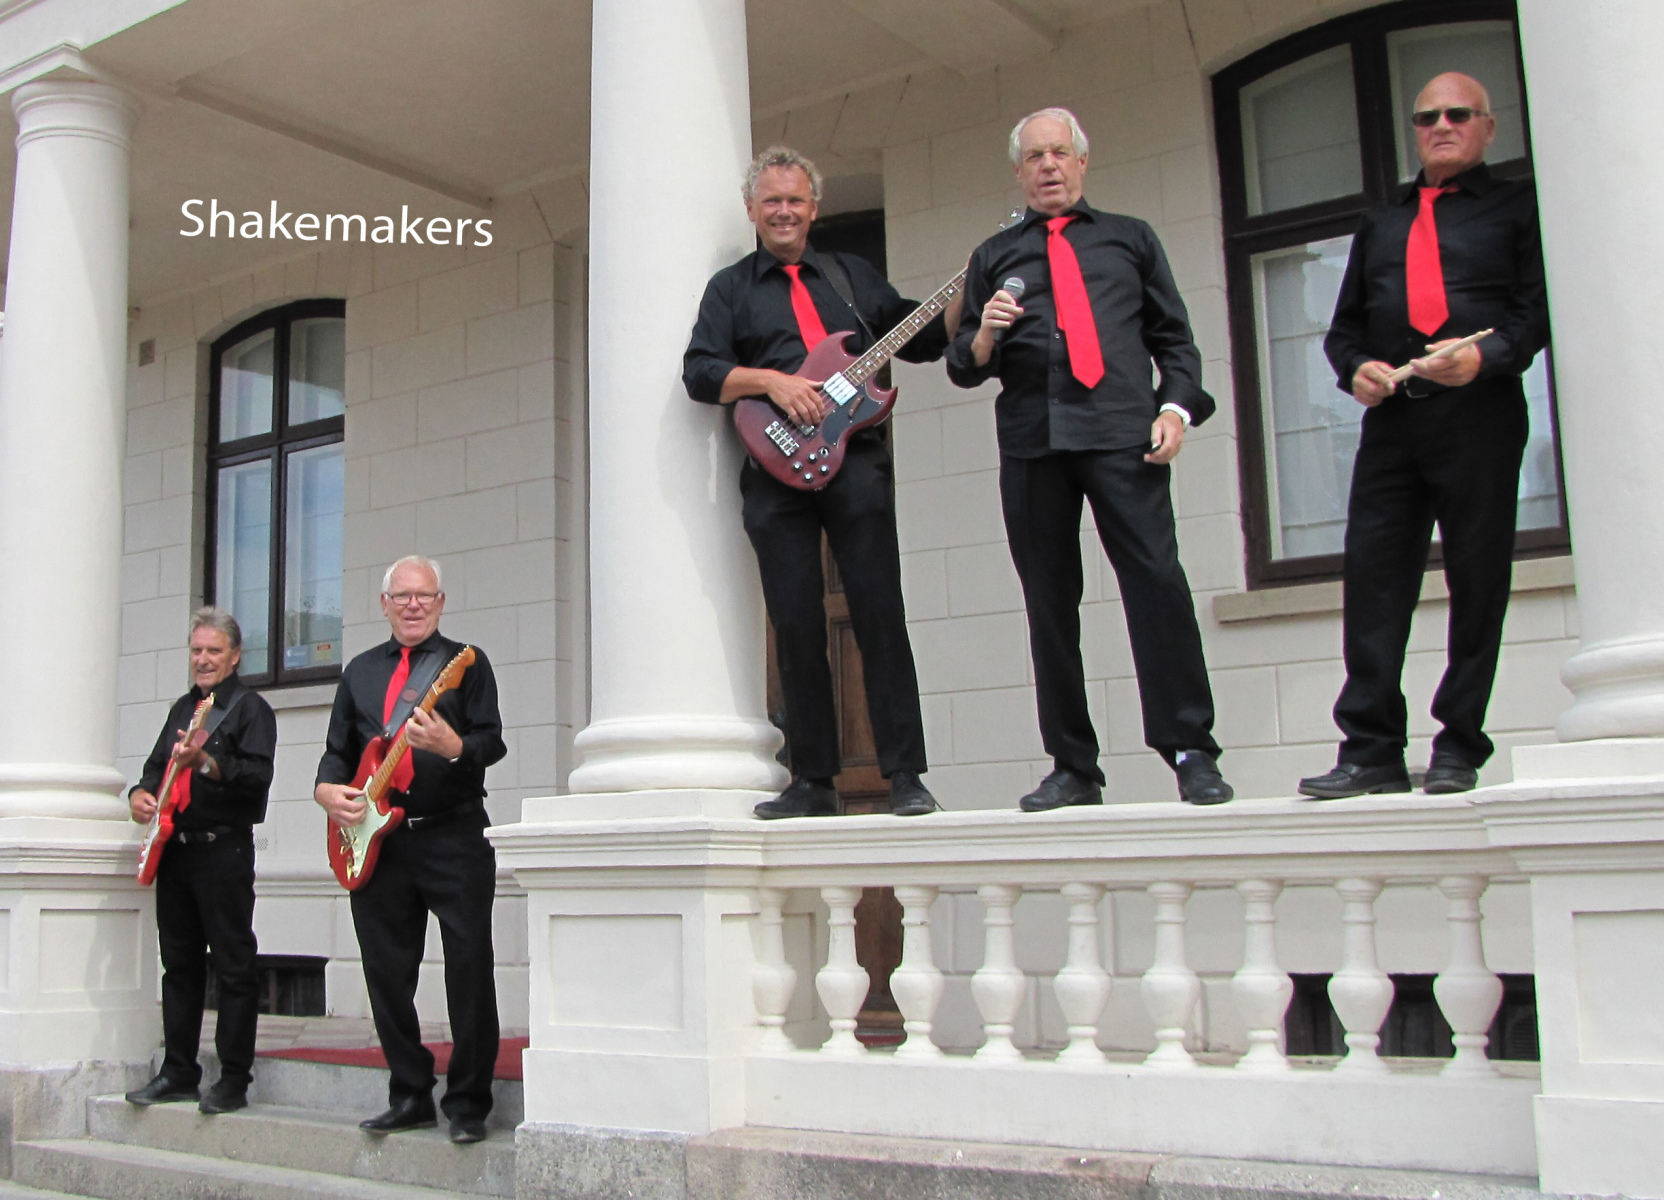 Shakemakers-2-a_edited-1